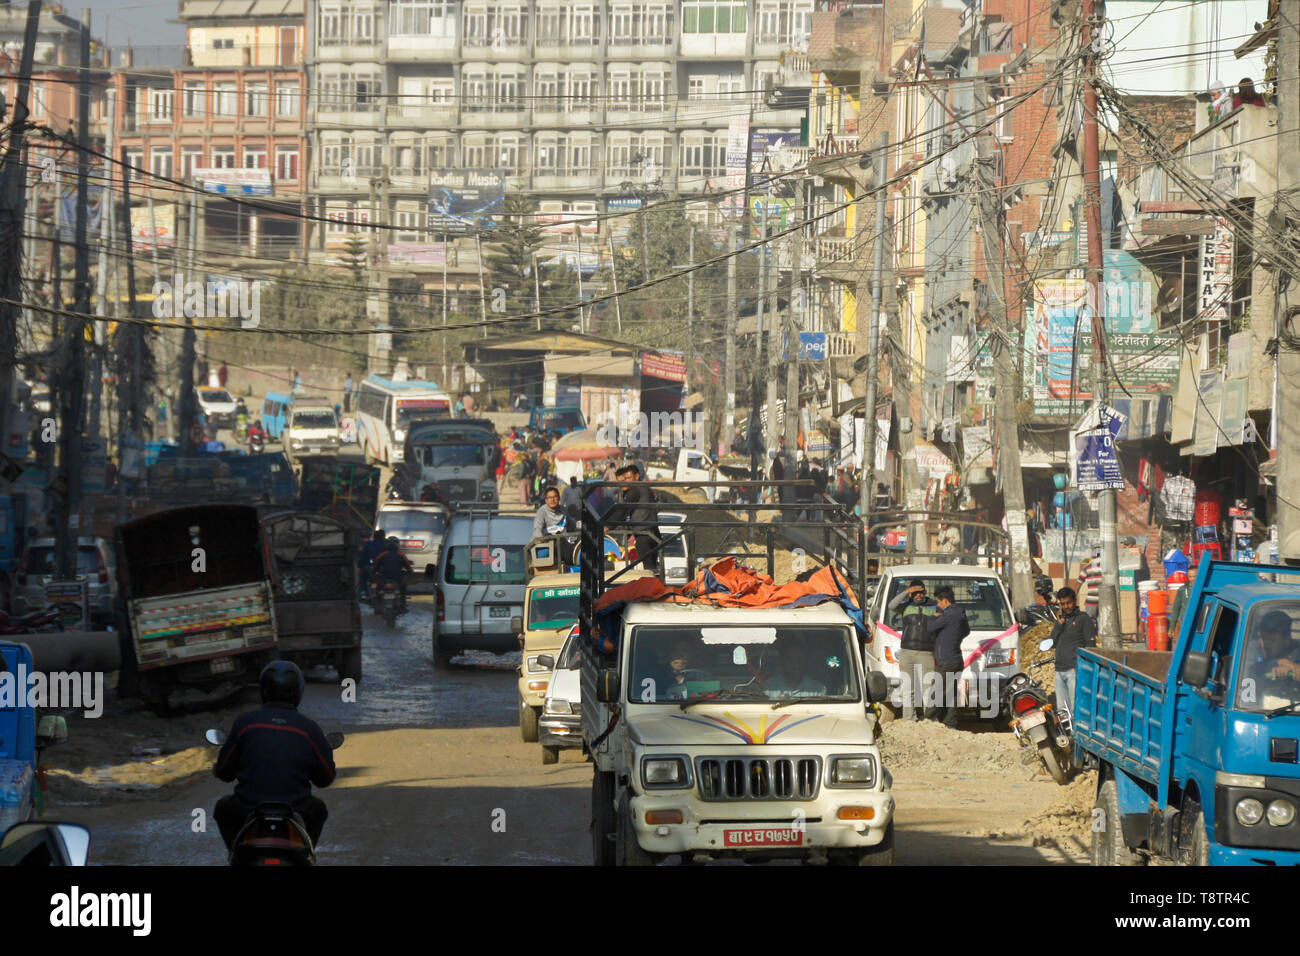 A tangle of vehicles and electrical wires on a crowded street under construction in Kathmandu, Nepal Stock Photo